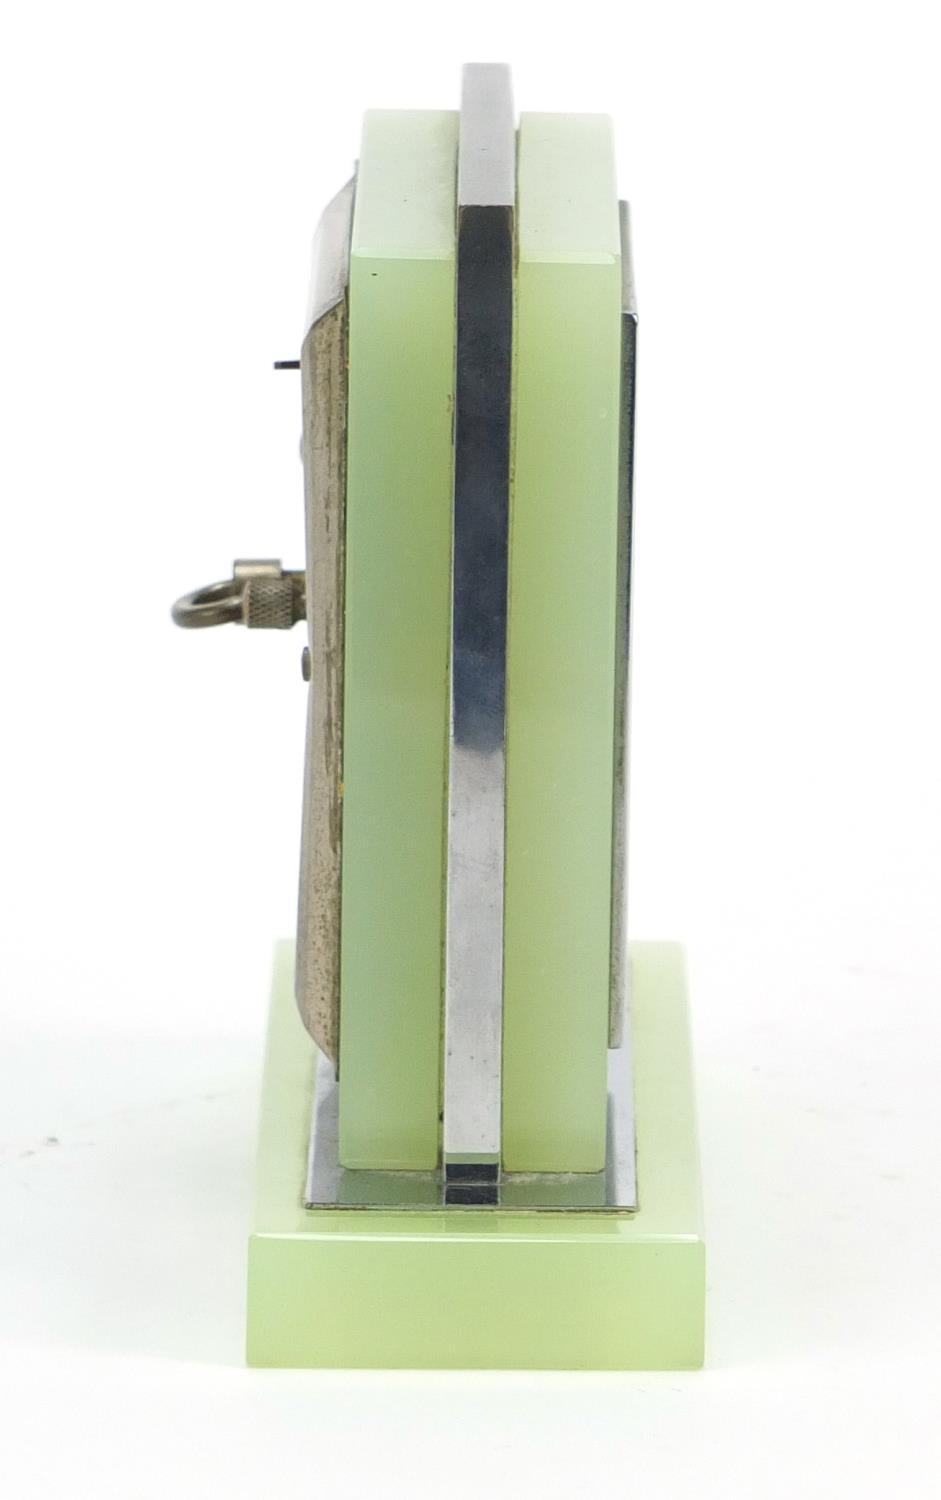 Art Deco chrome and lime green glass desk clock with silvered dial having Arabic numerals, 12cm high - Image 6 of 6